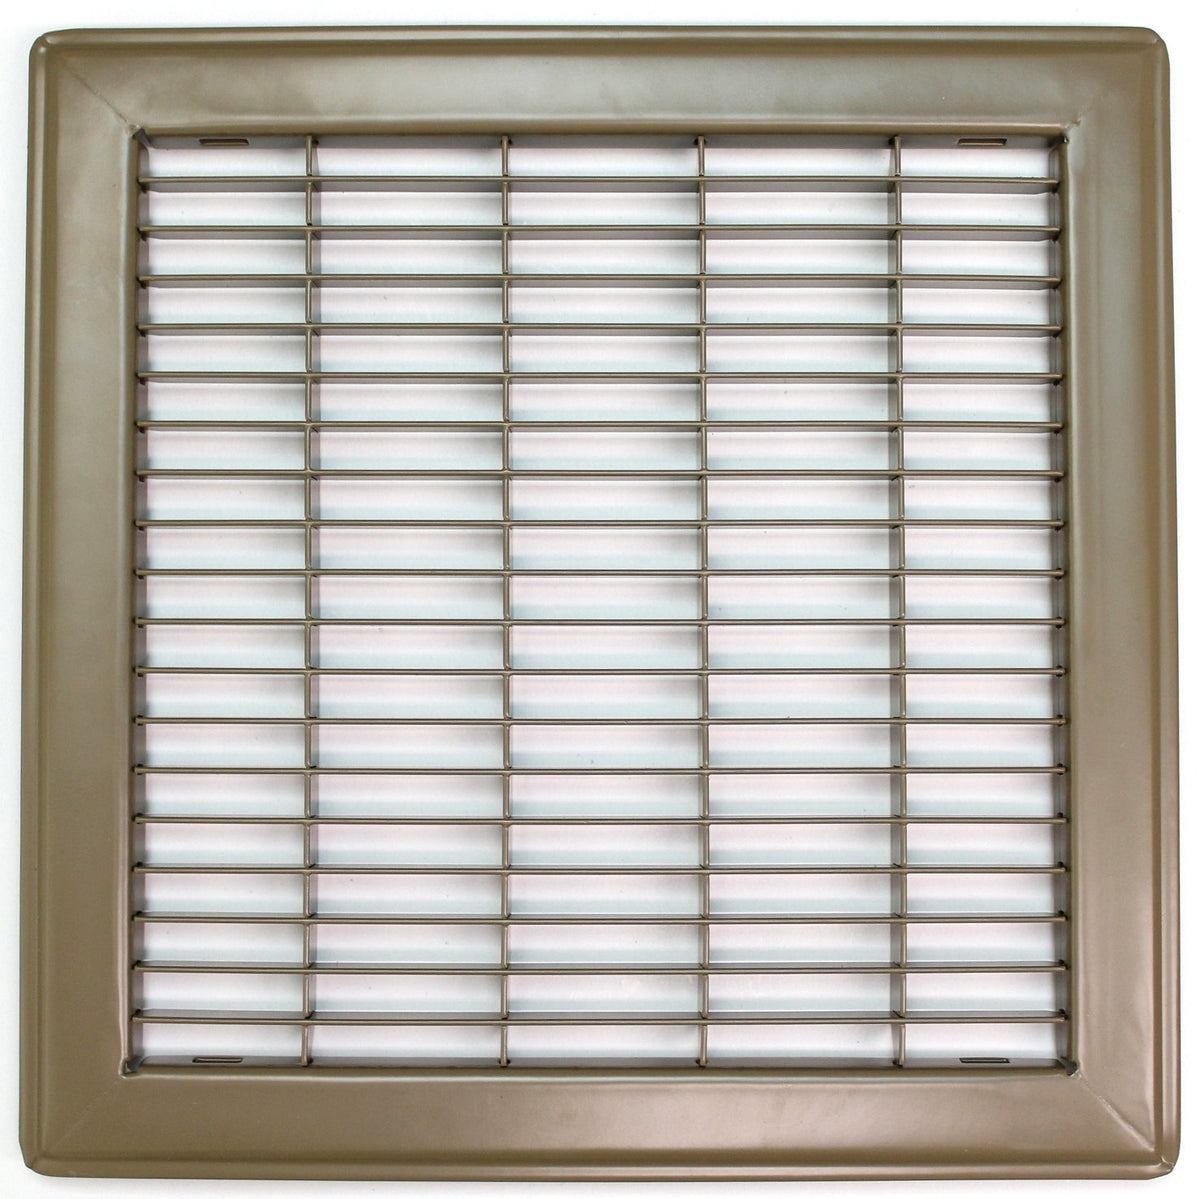 8&quot; X 8&quot; Heavy Duty Floor Grille - Fixed Blades Air Grille - Brown [Outer Dimensions: 9.75 X 9.75]